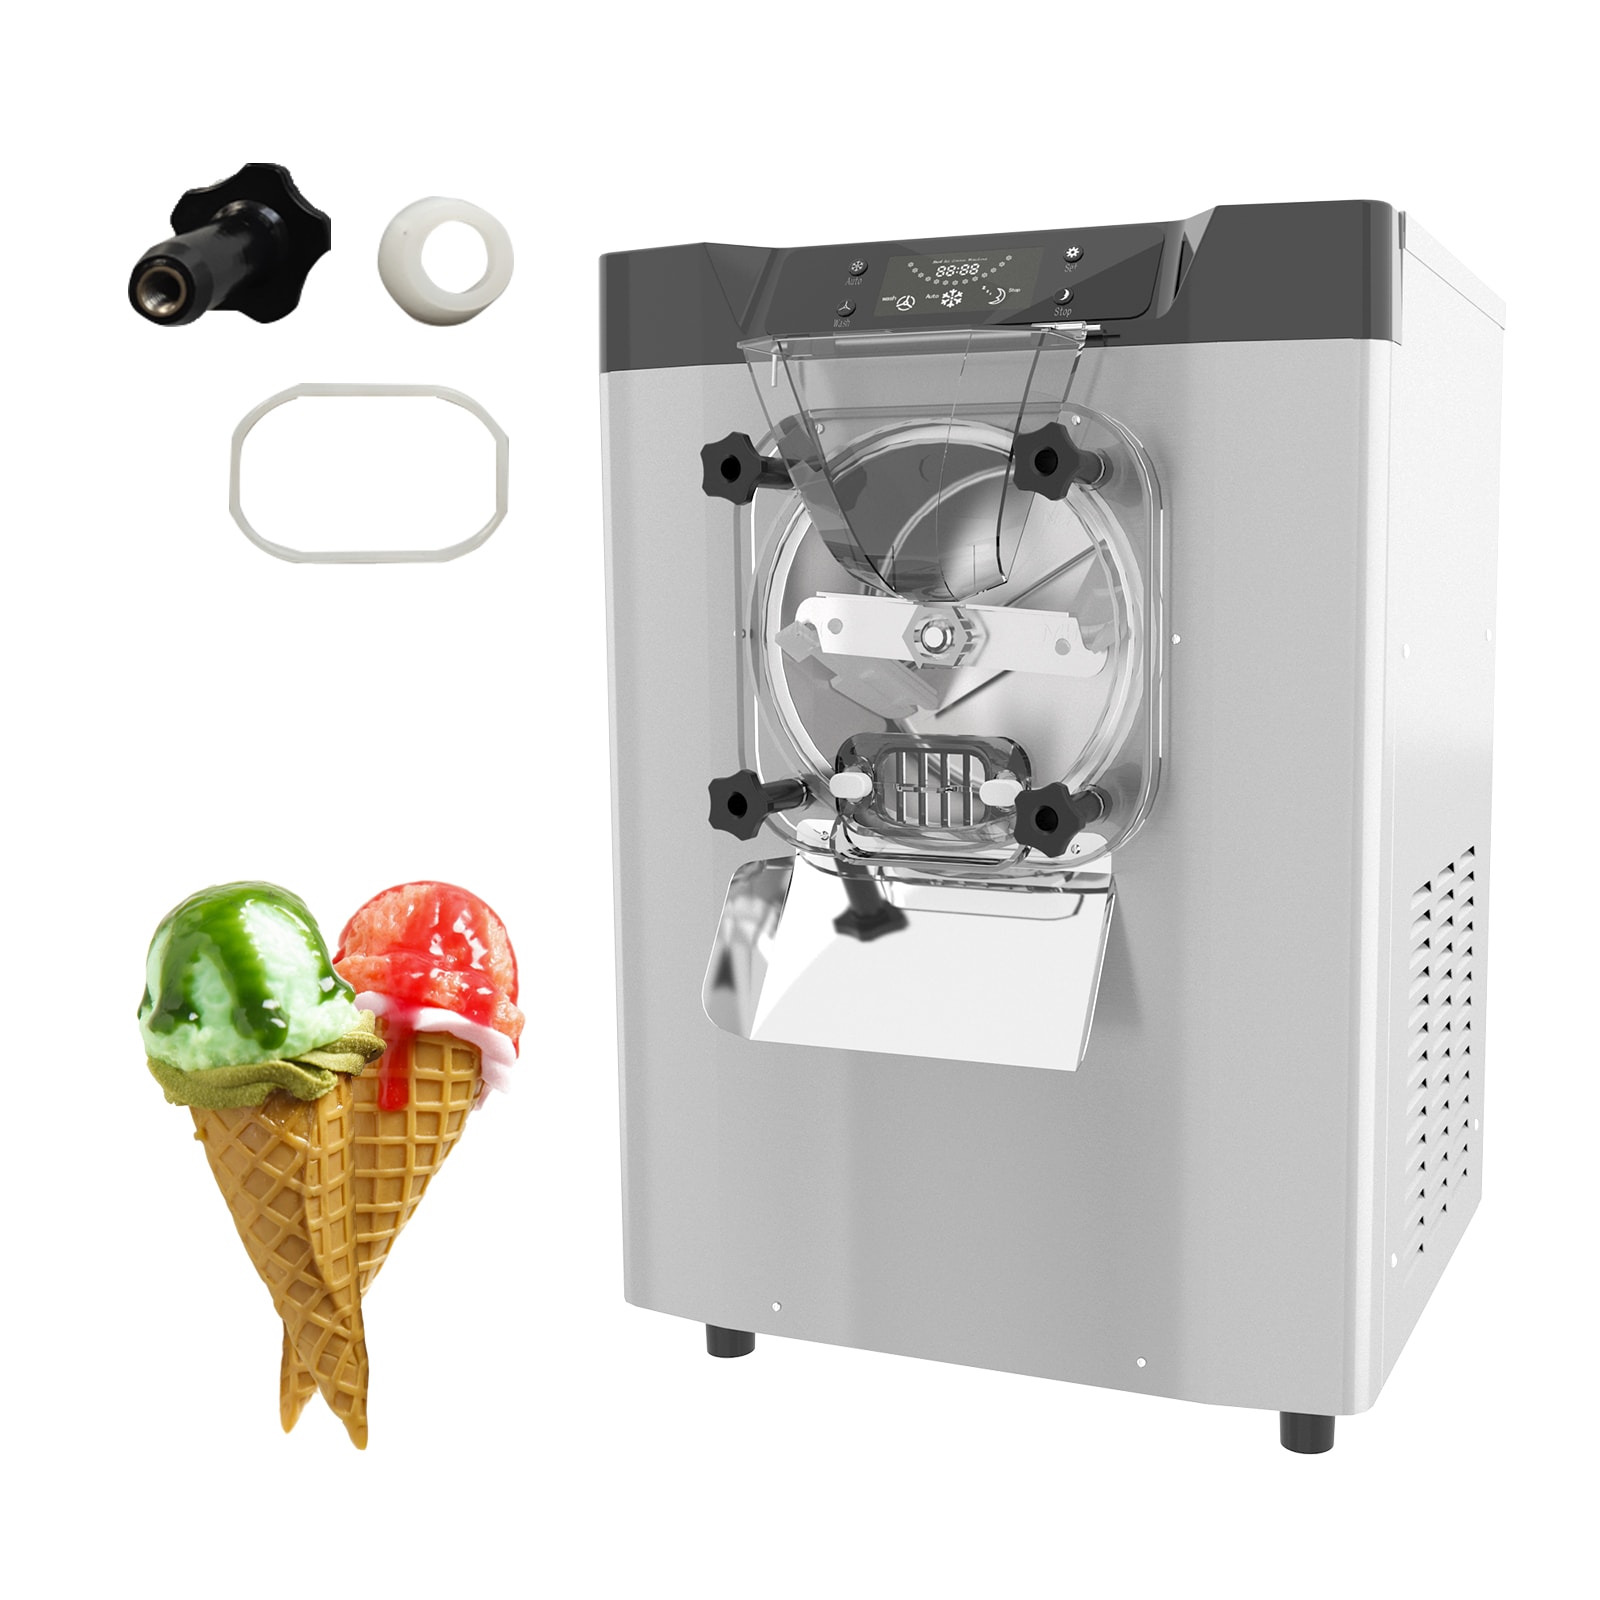 This gadget with more than 1,000  reviews churns homemade ice cream  for you